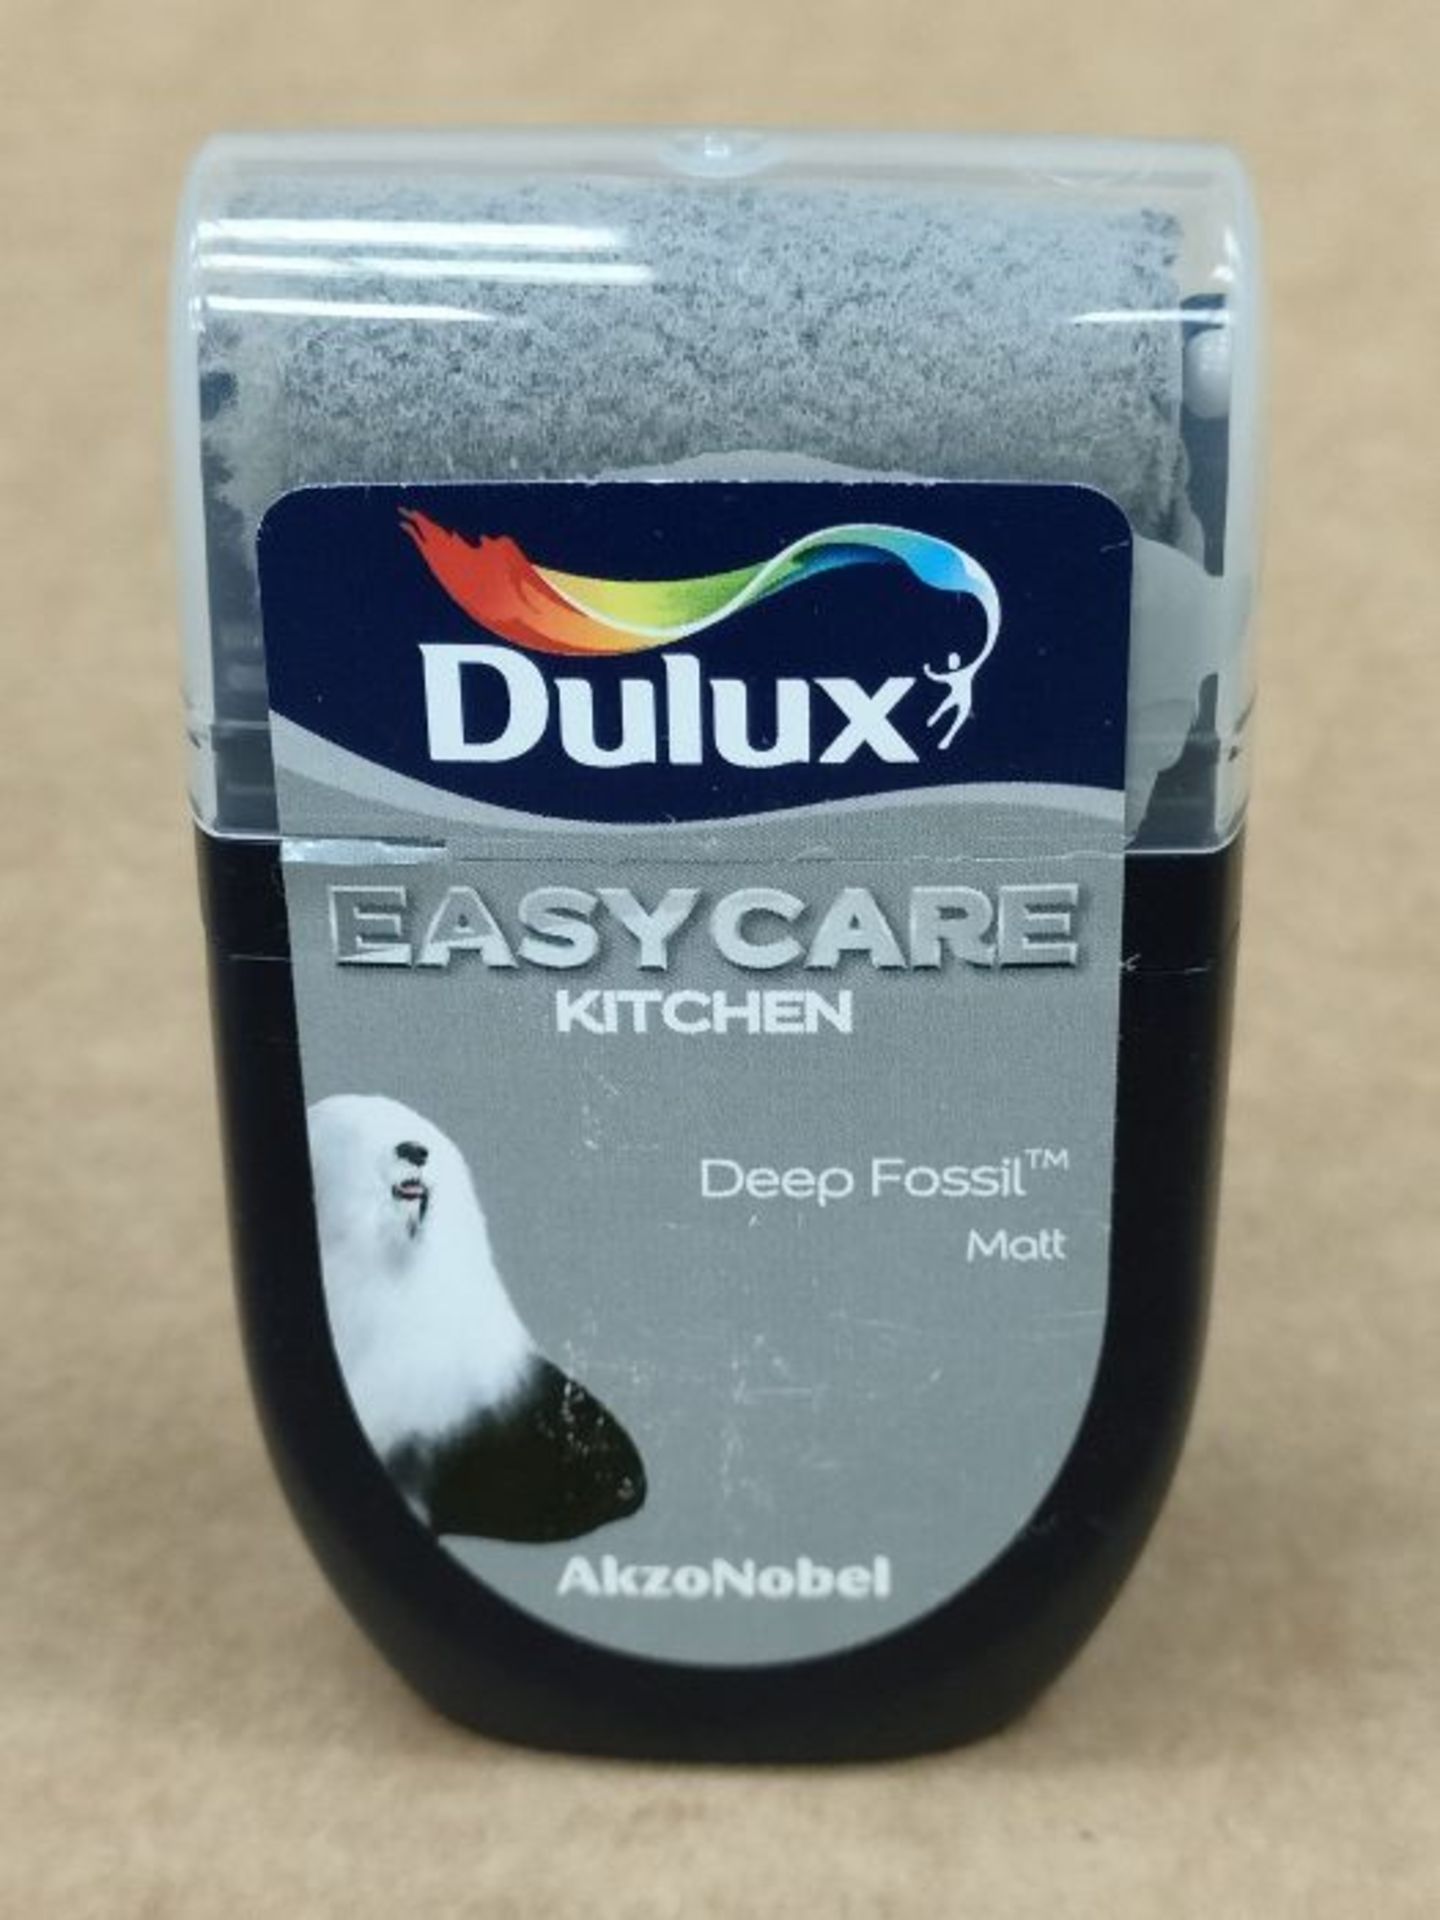 Dulux 5268149 Easycare Kitchen Tester Paint, Chic Shadow, 30 Millilitres - Image 2 of 2